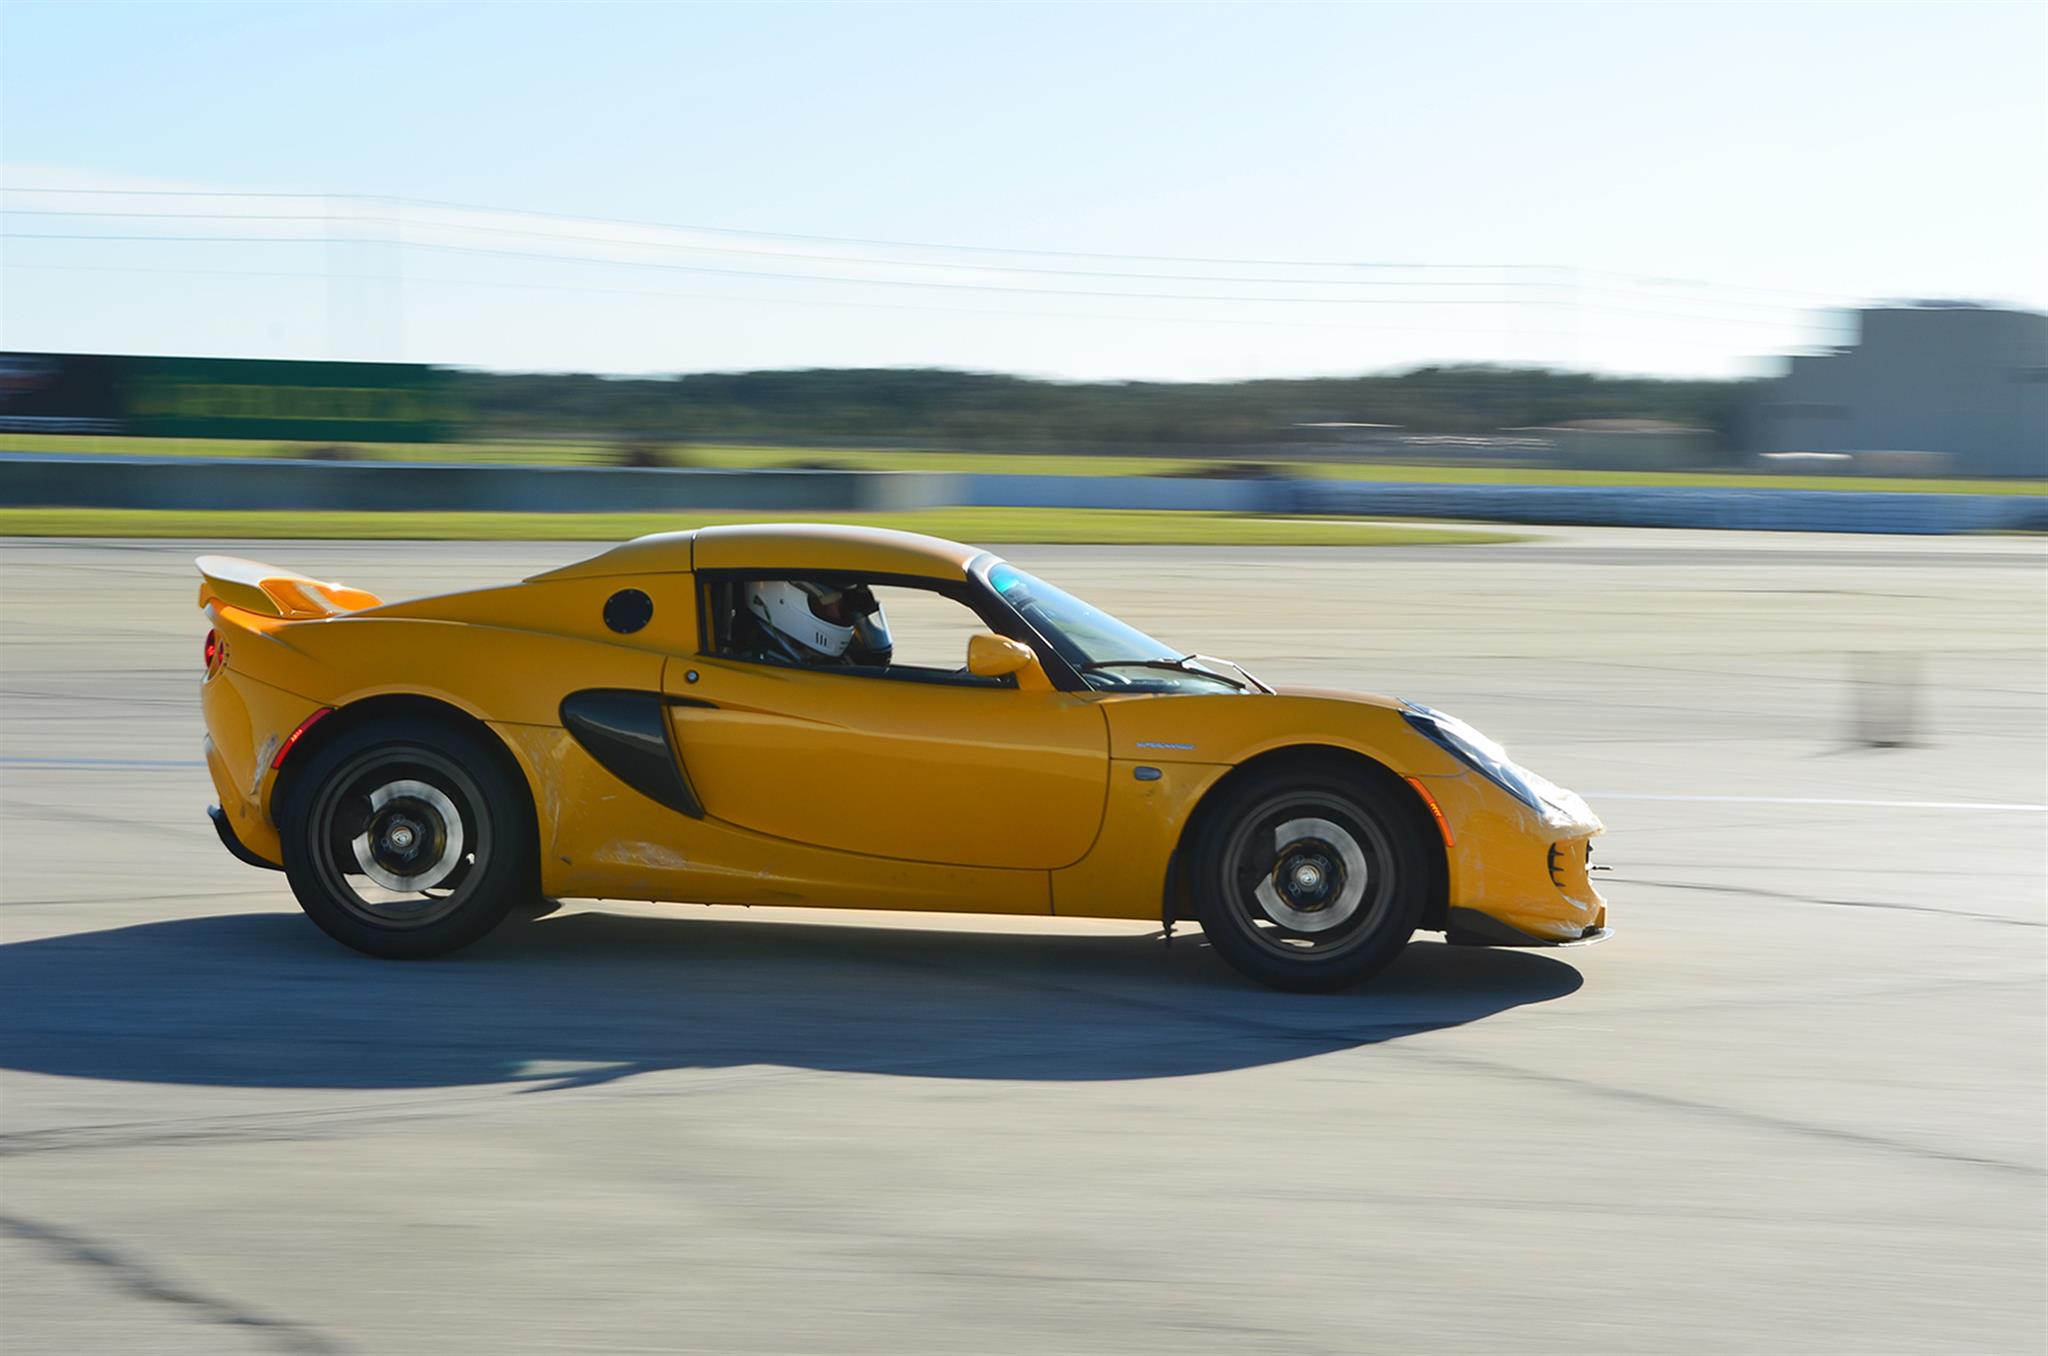 2006 Supercharged Lotus Elise -  Early stage of the project